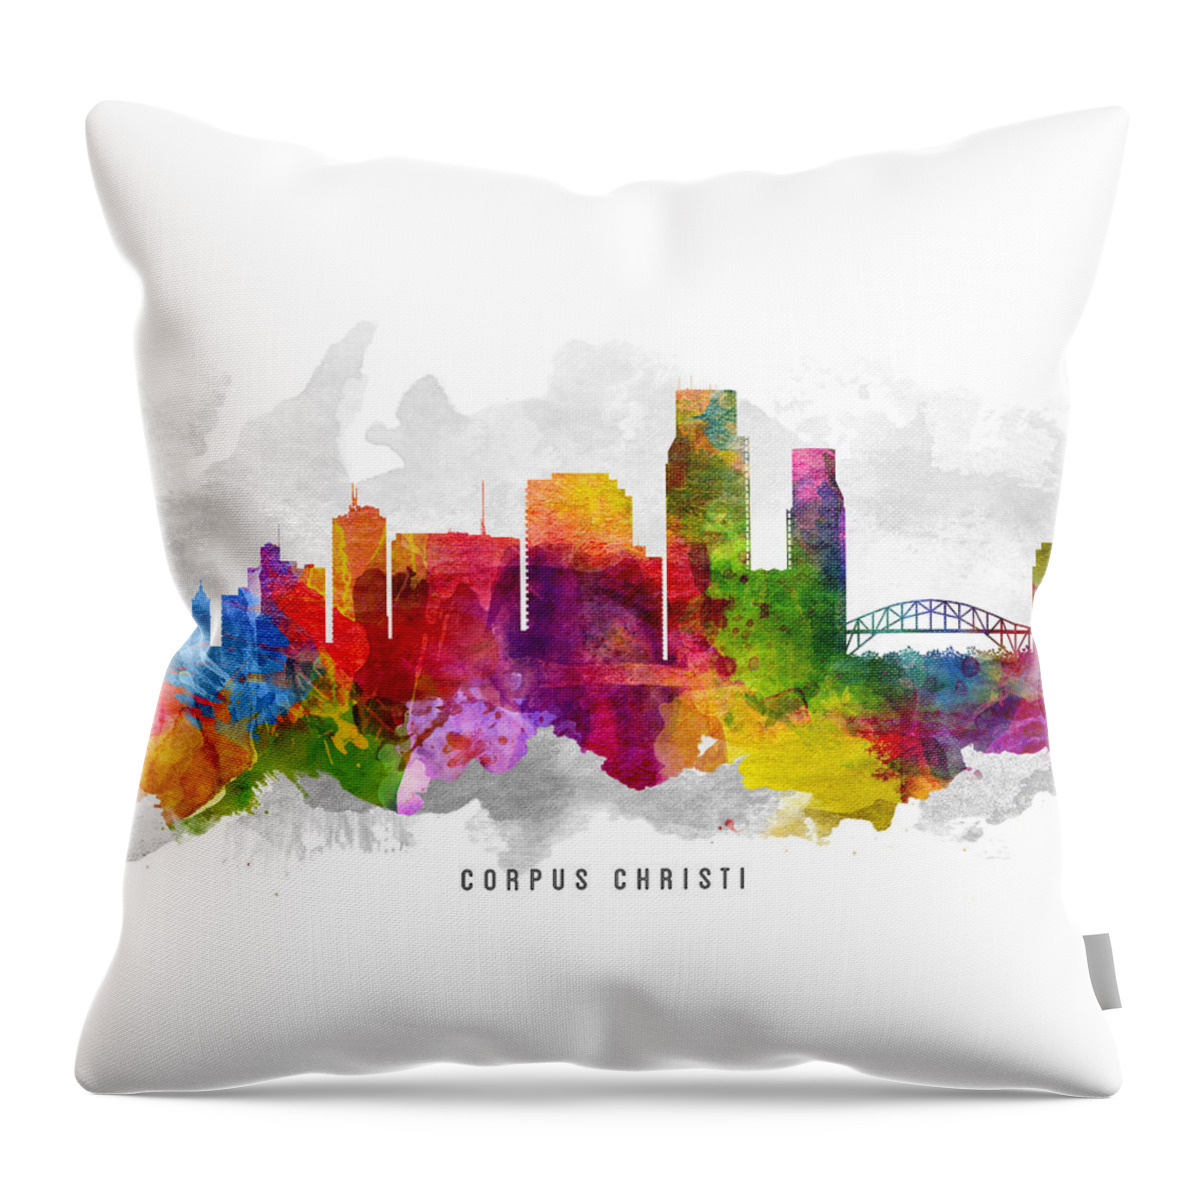 Corpus Christi Throw Pillow featuring the painting Corpus Christi Texas Cityscape 13 by Aged Pixel